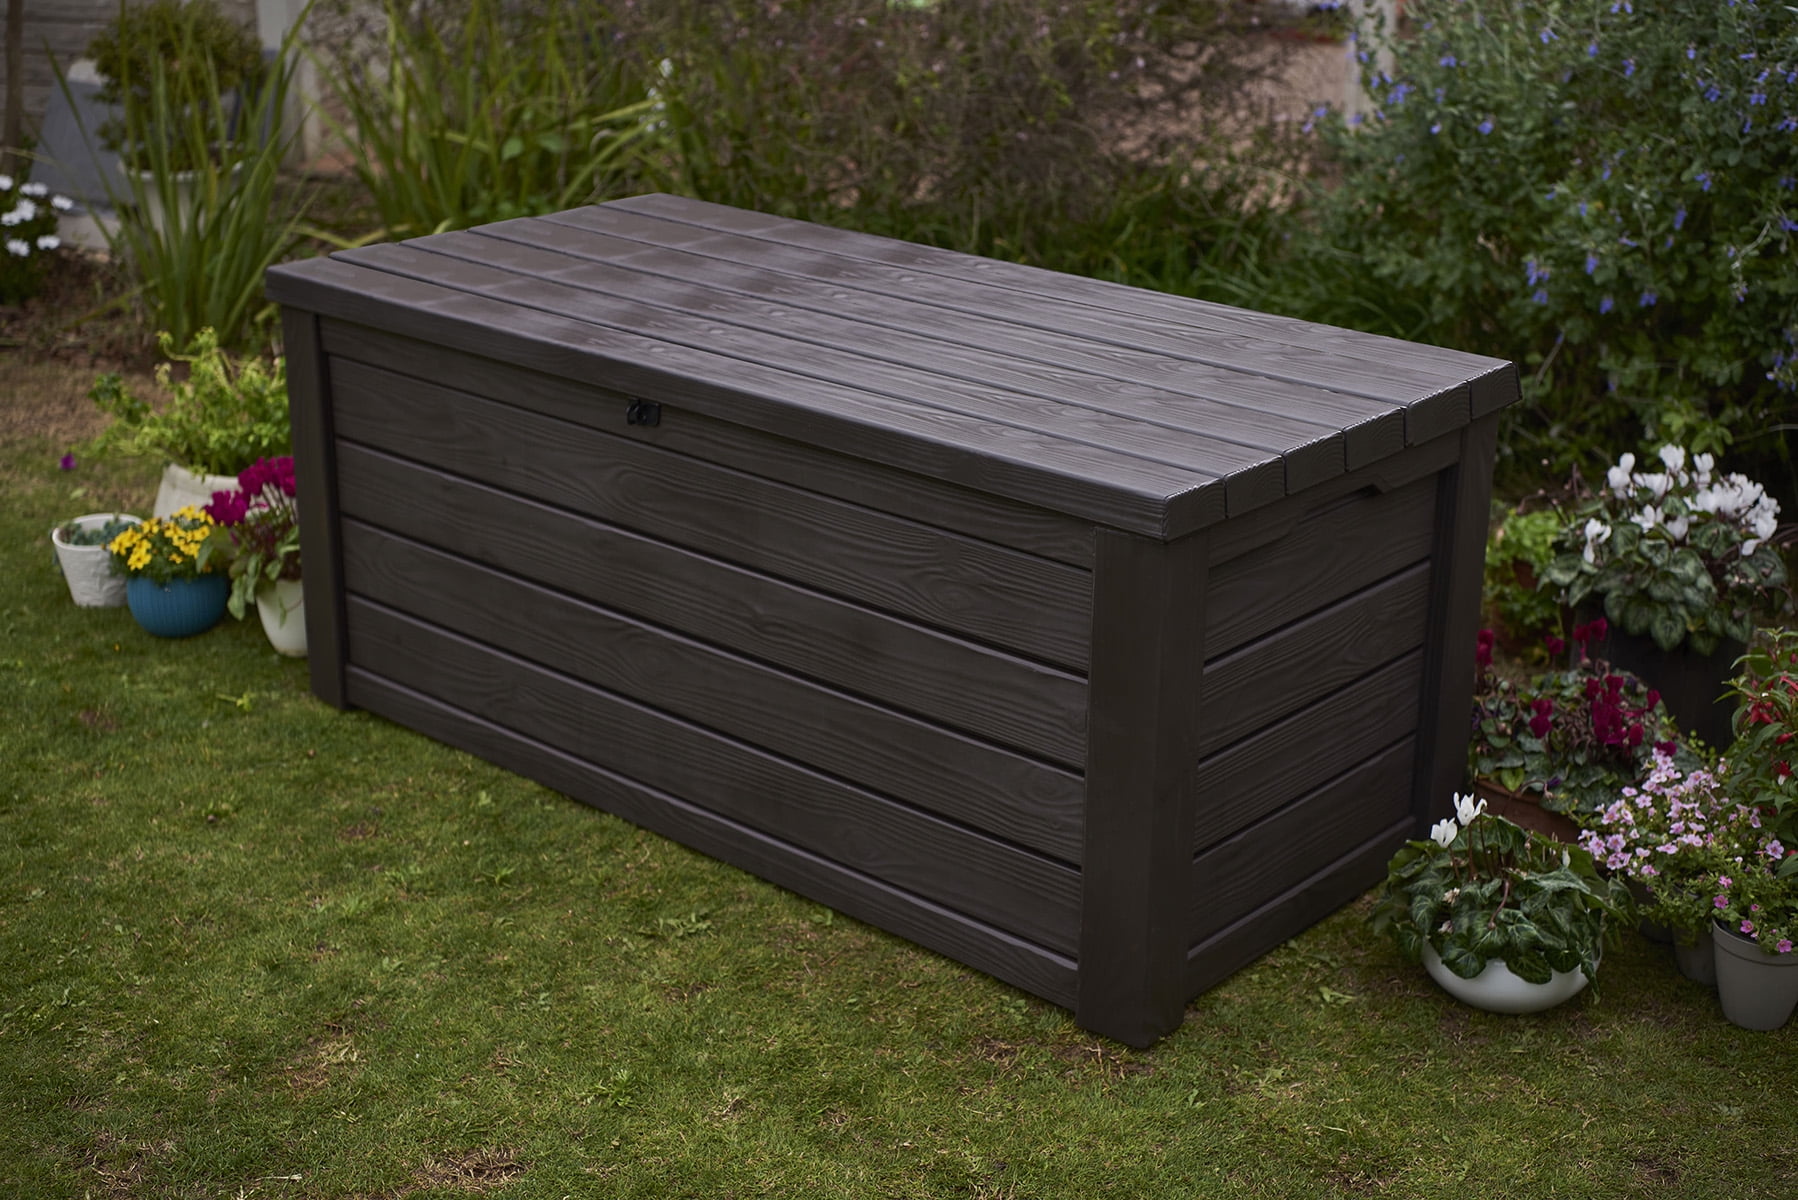 Wood Look All Weather Outdoor Storage Yancy 150 Gallon Resin Deck Box 